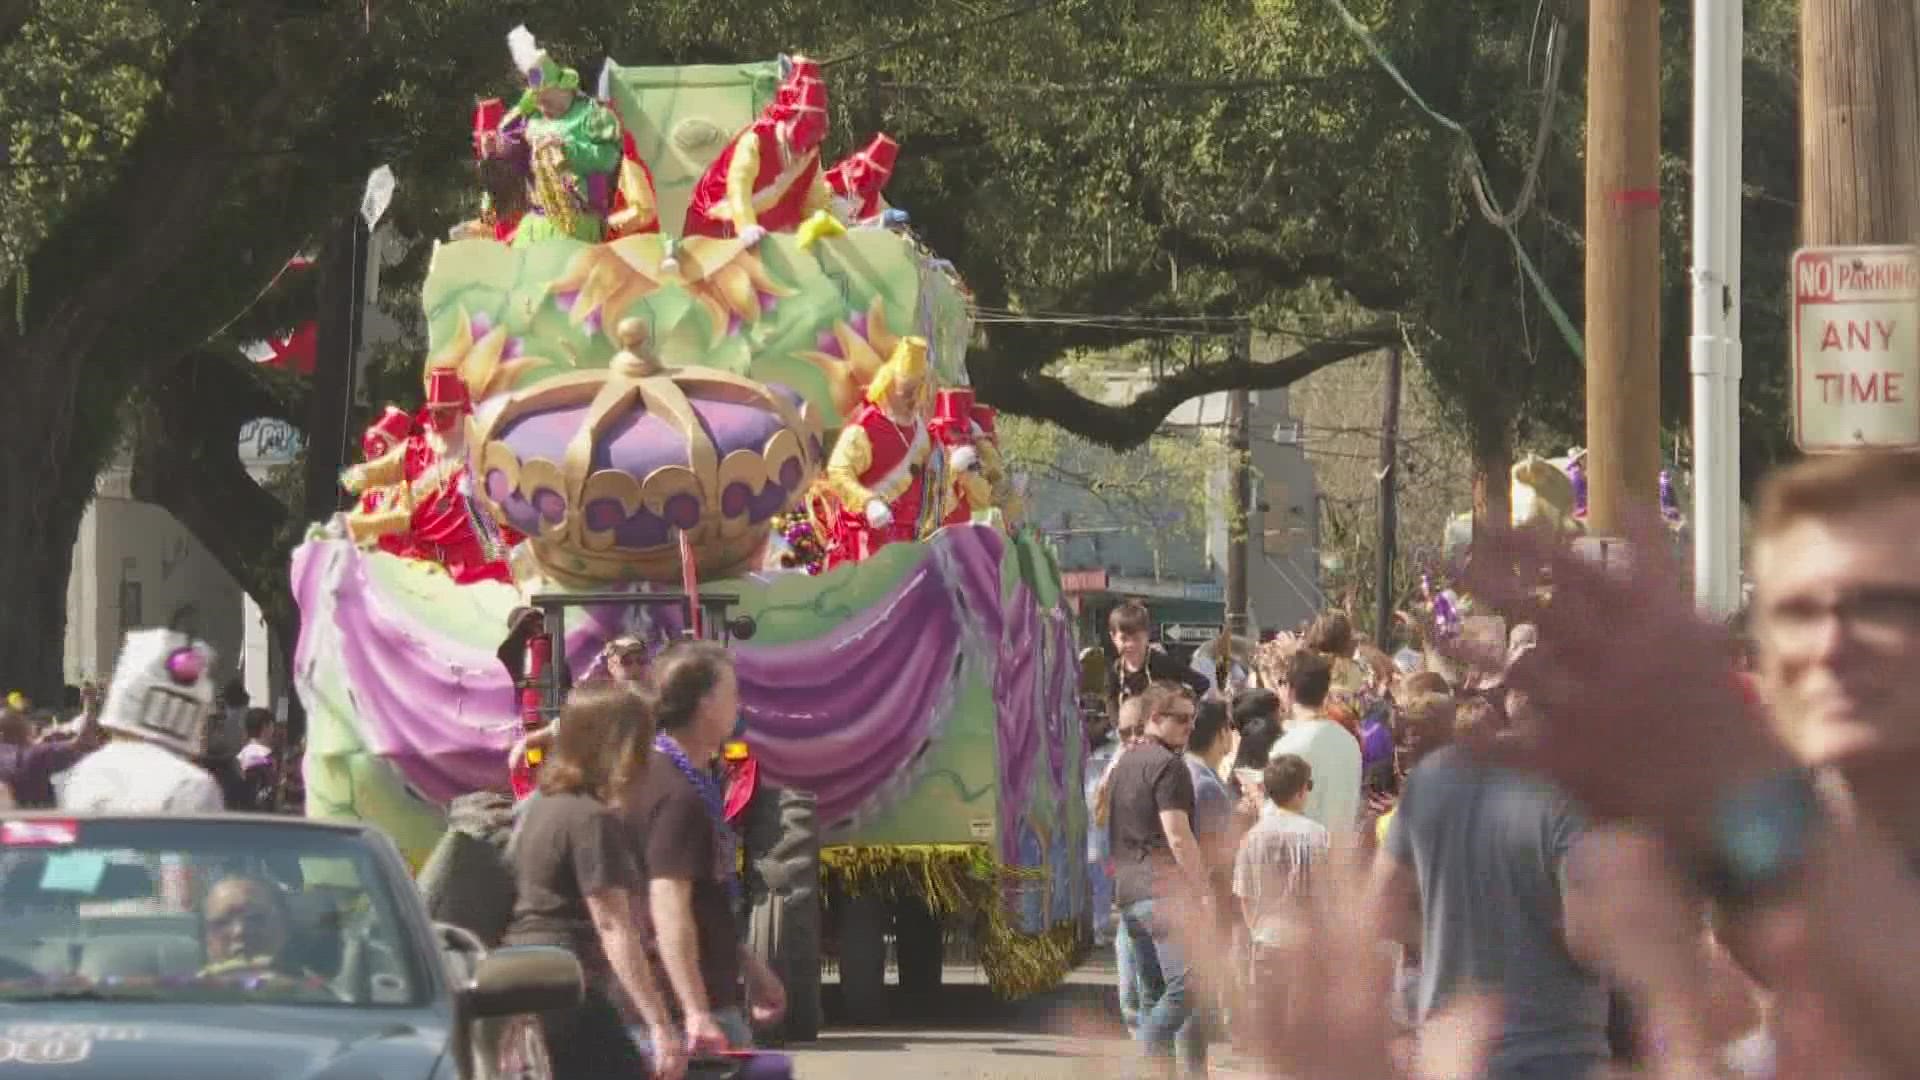 As plans for Mardi Gras are still in the works, Mayor Cantrell is suggesting that every parade rolls the same route.